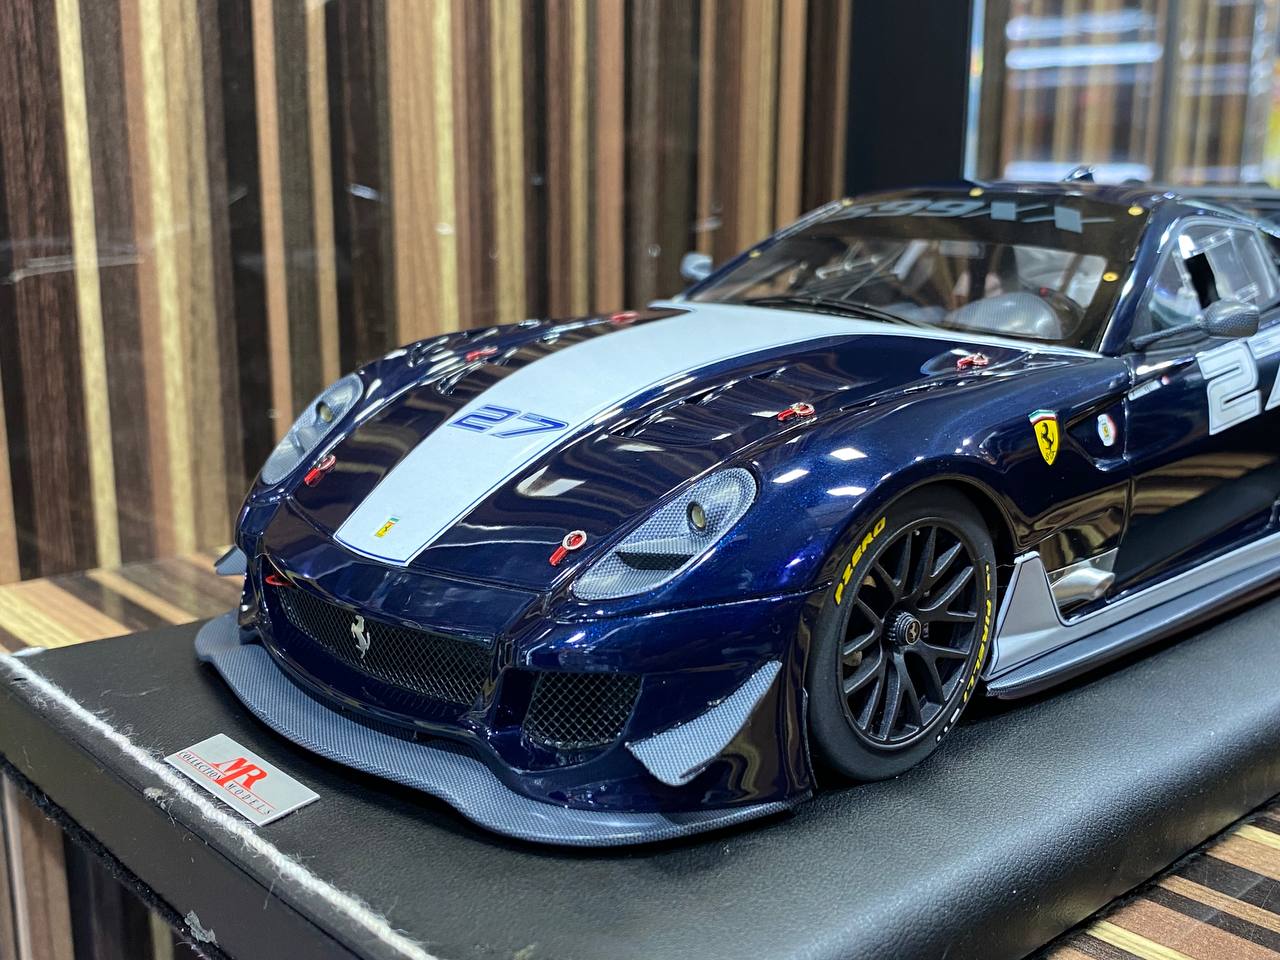 Ferrari 599xx #27 by MR Collection [ 1/18, Blue, Resin]